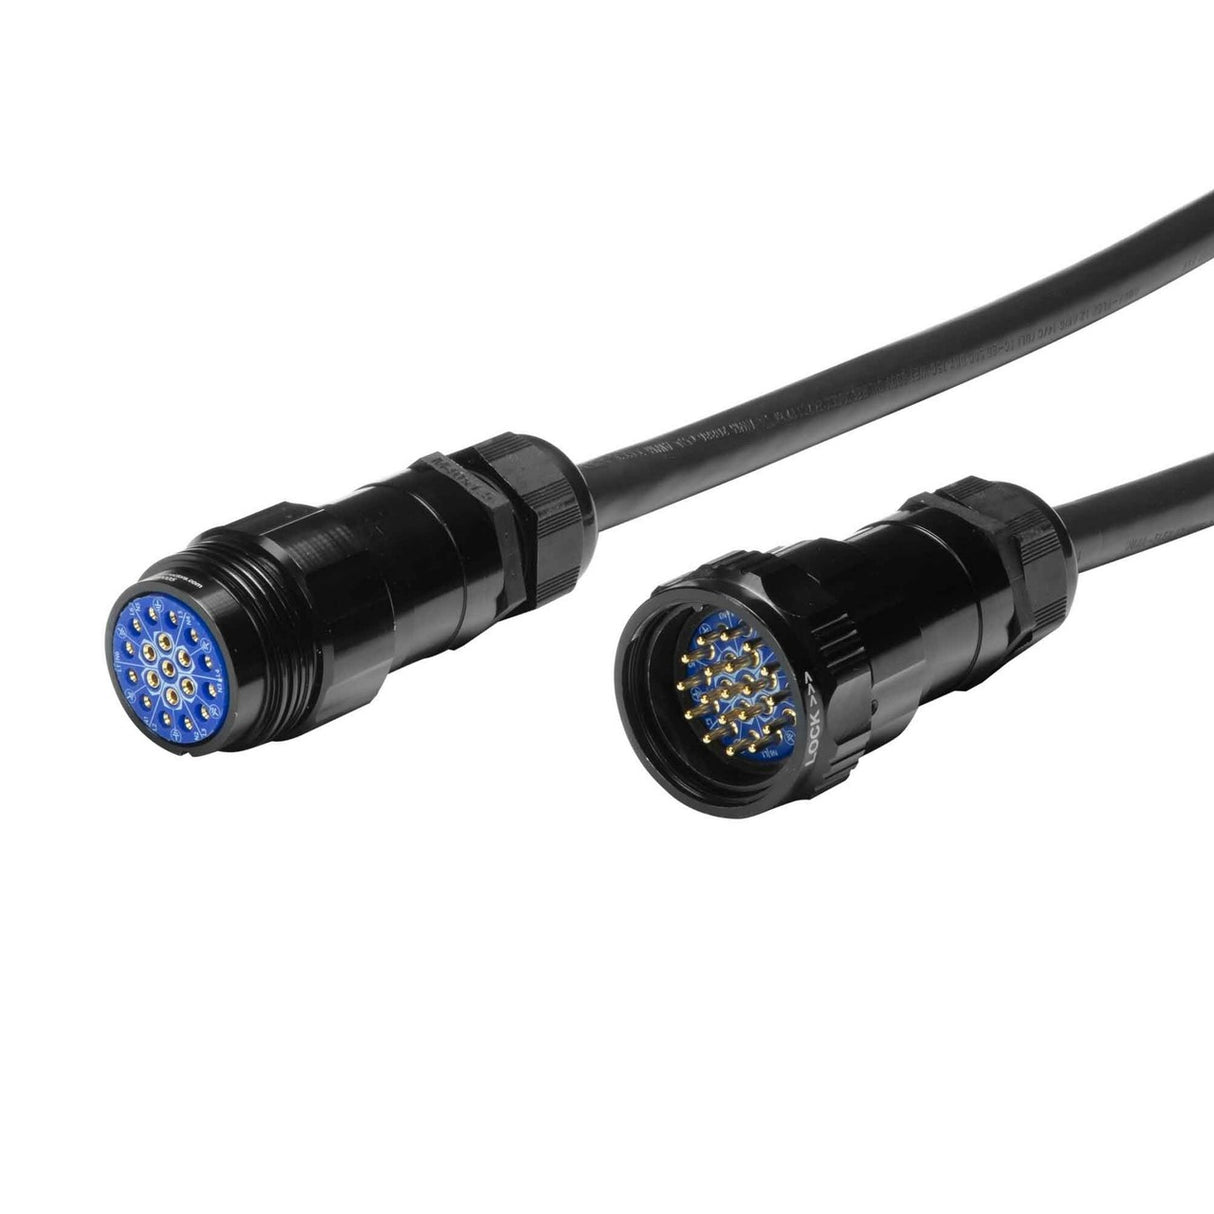 Elite Core 19 Pin Soco Extension Male to Female Lighting Power Cable with Standard Connector, 30 Foot